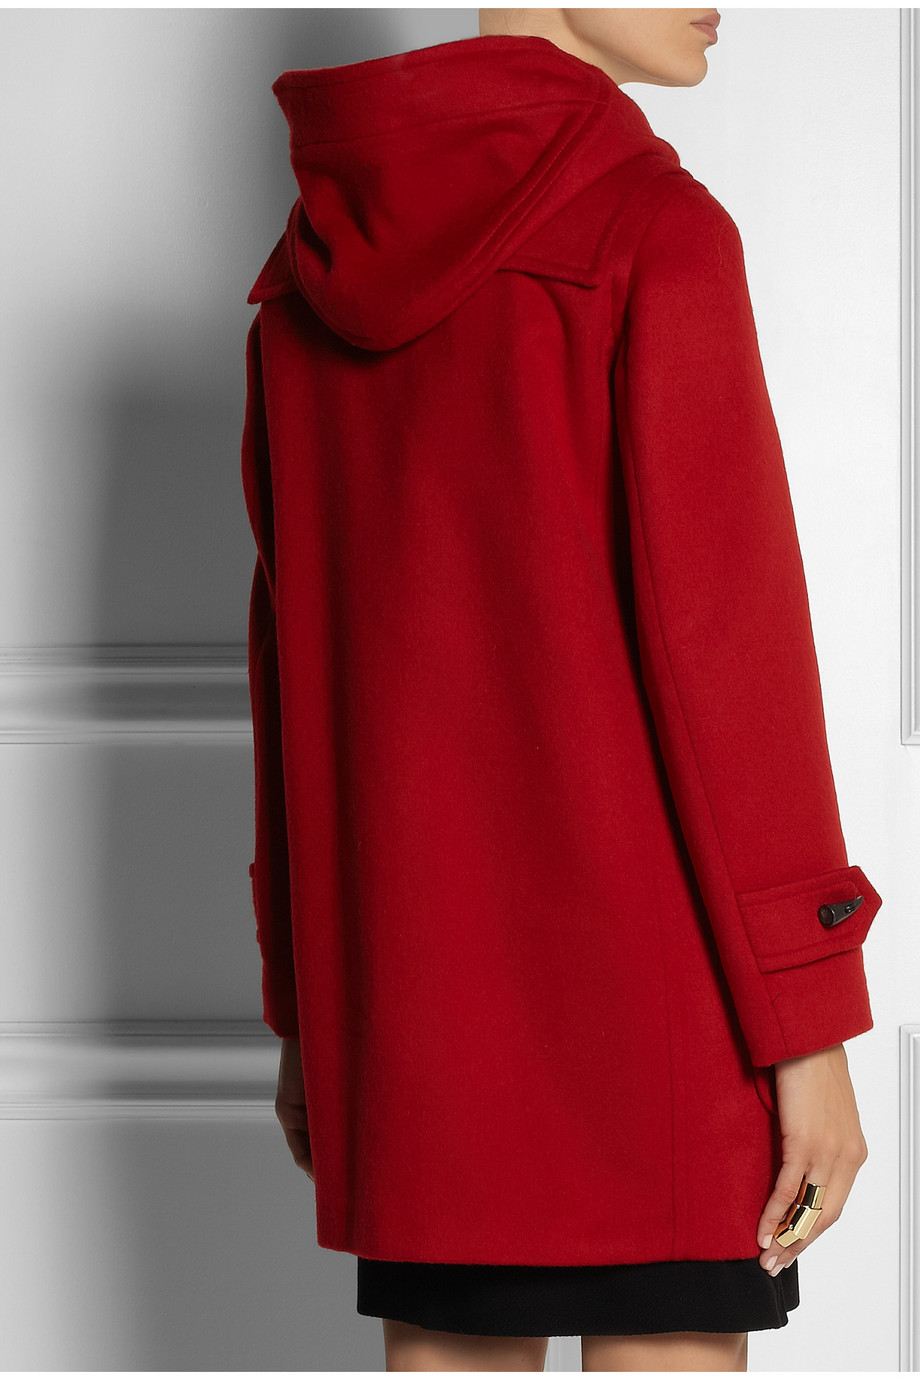 Times delivery red wool coat with hood george asda, Cute sweaters for women cheap, womens long cardigan sweater coat. 